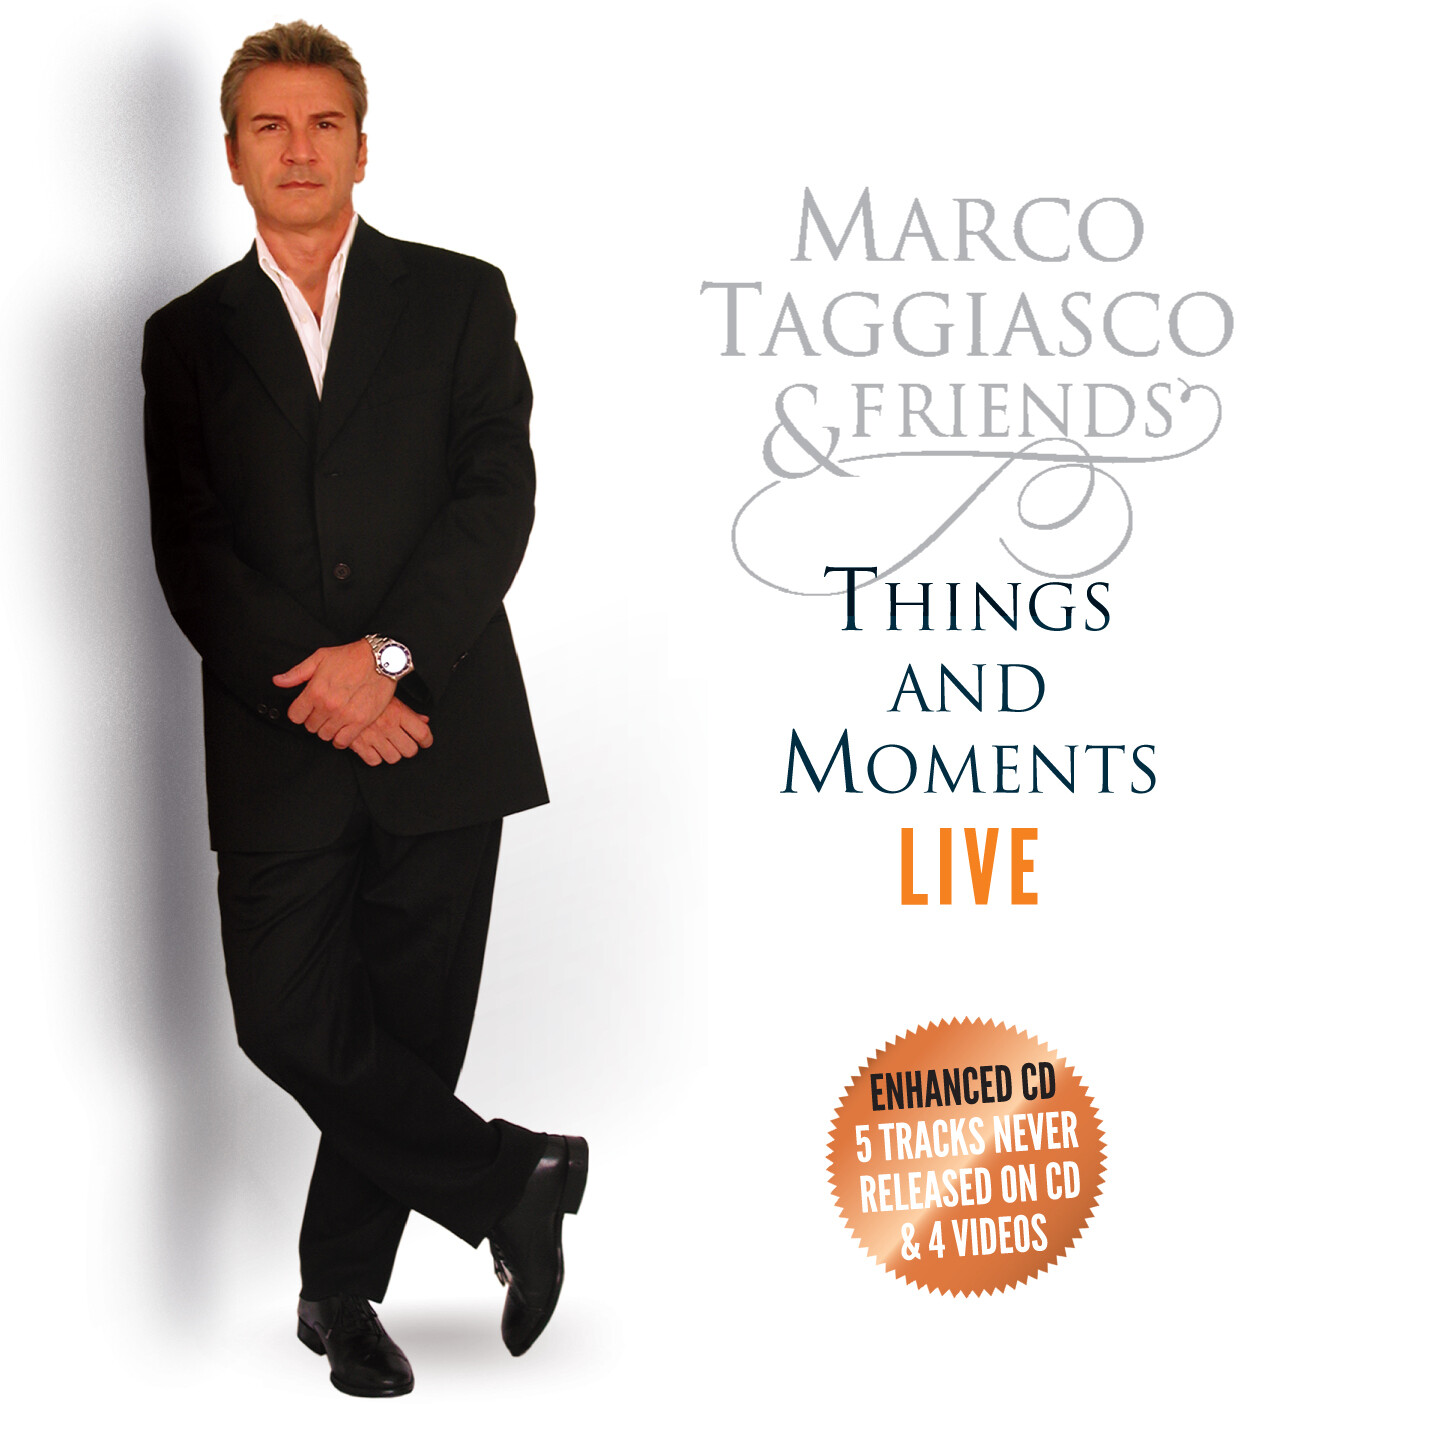 Marco Taggiasco & Friends - Things and Moments LIVE
**SPECIAL OFFER**